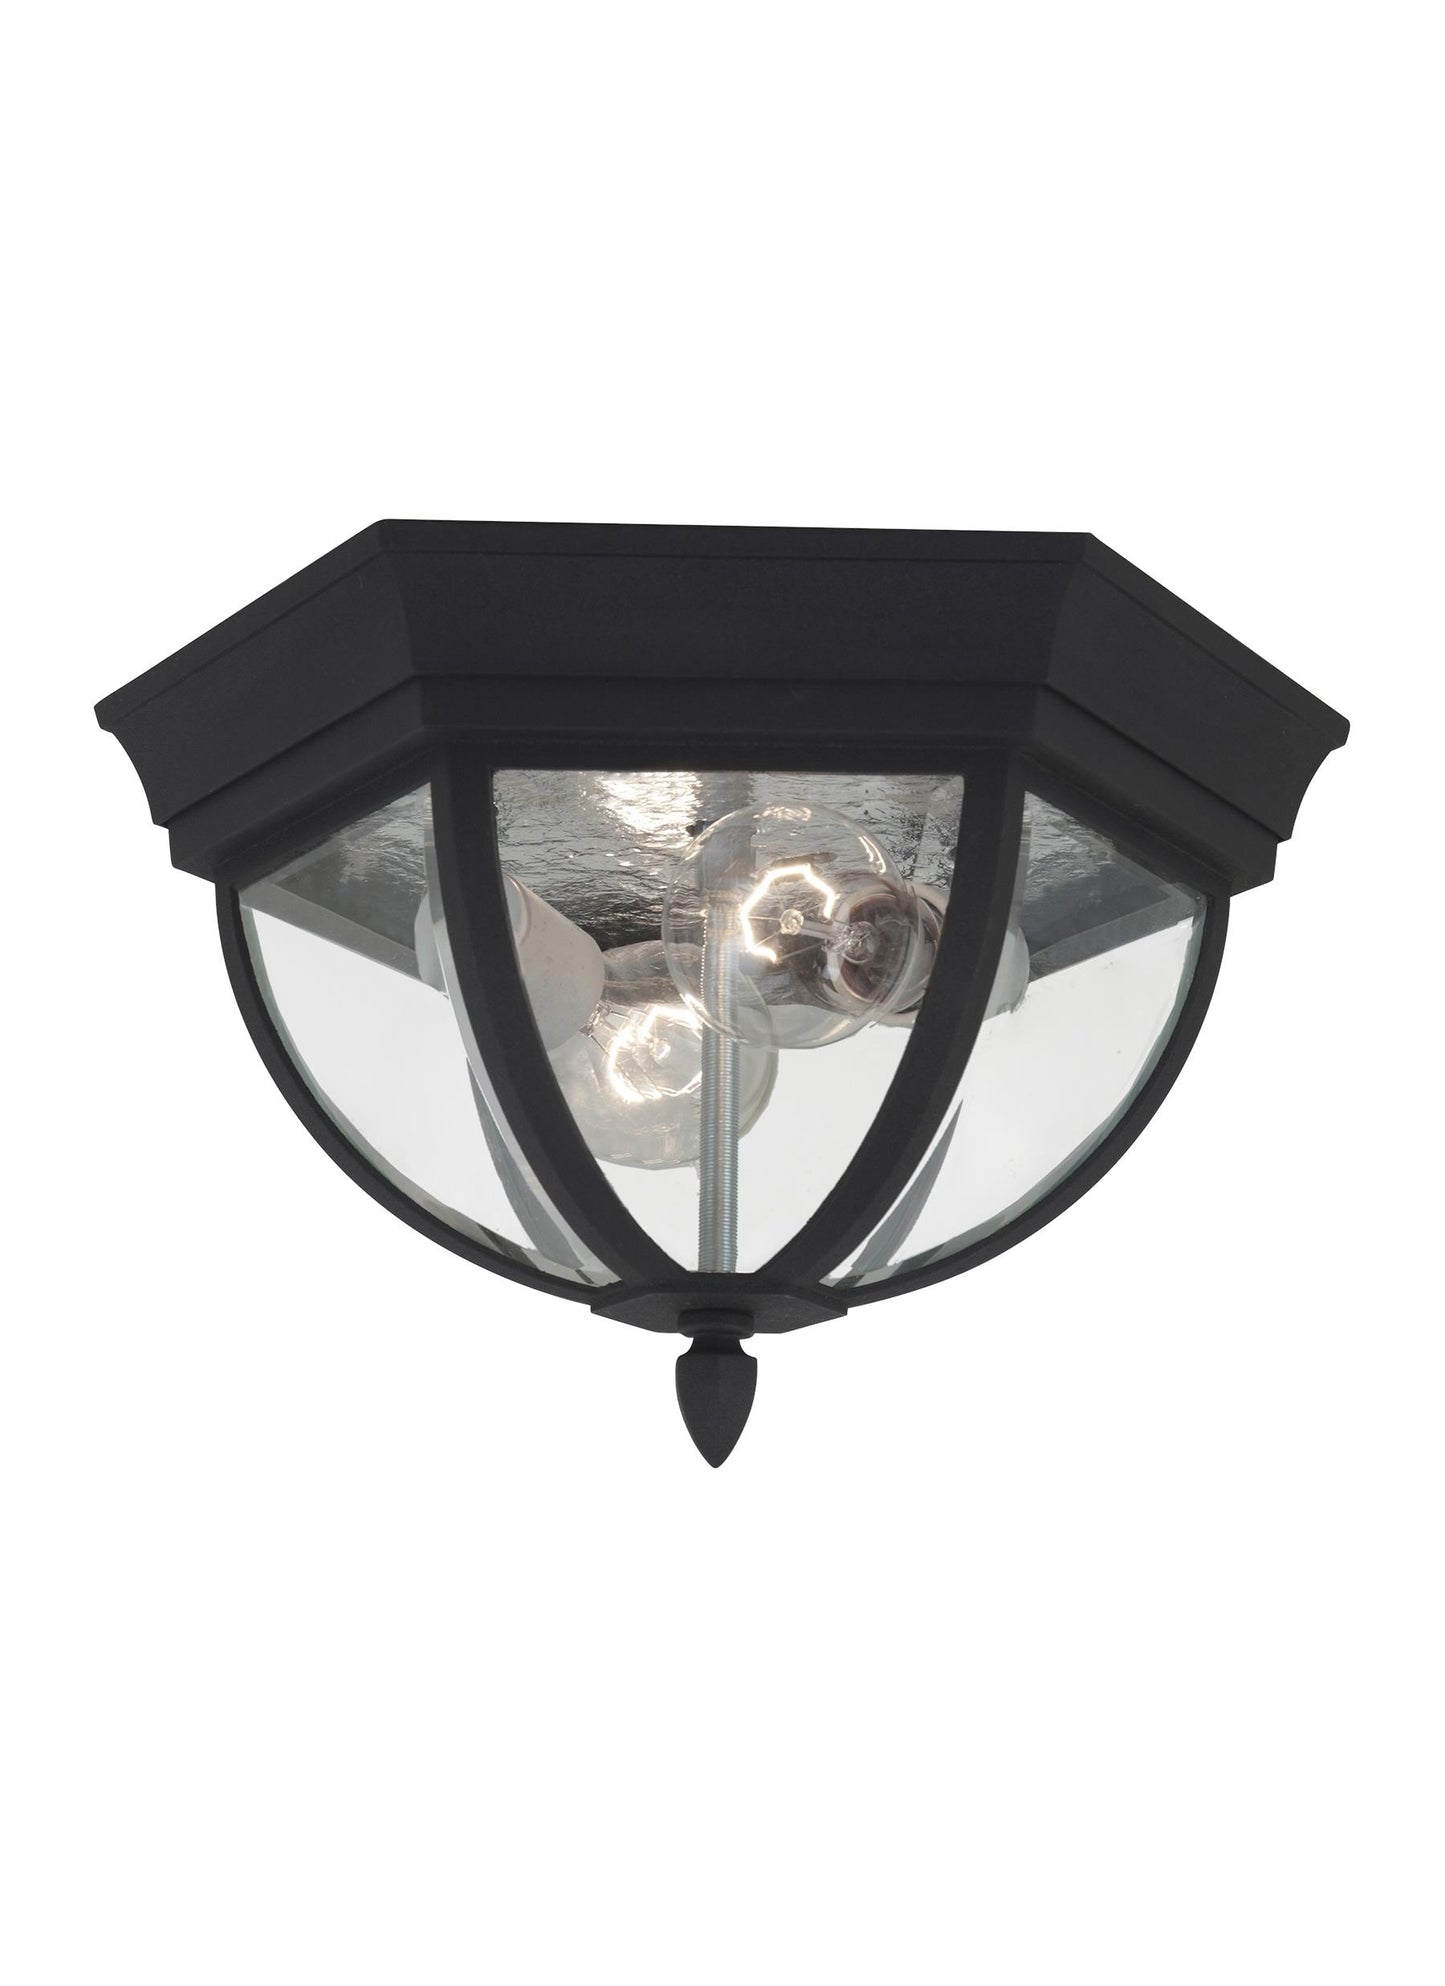 Wynfield traditional 2-light outdoor exterior ceiling ceiling flush mount in black finish with clear beveled glass panels